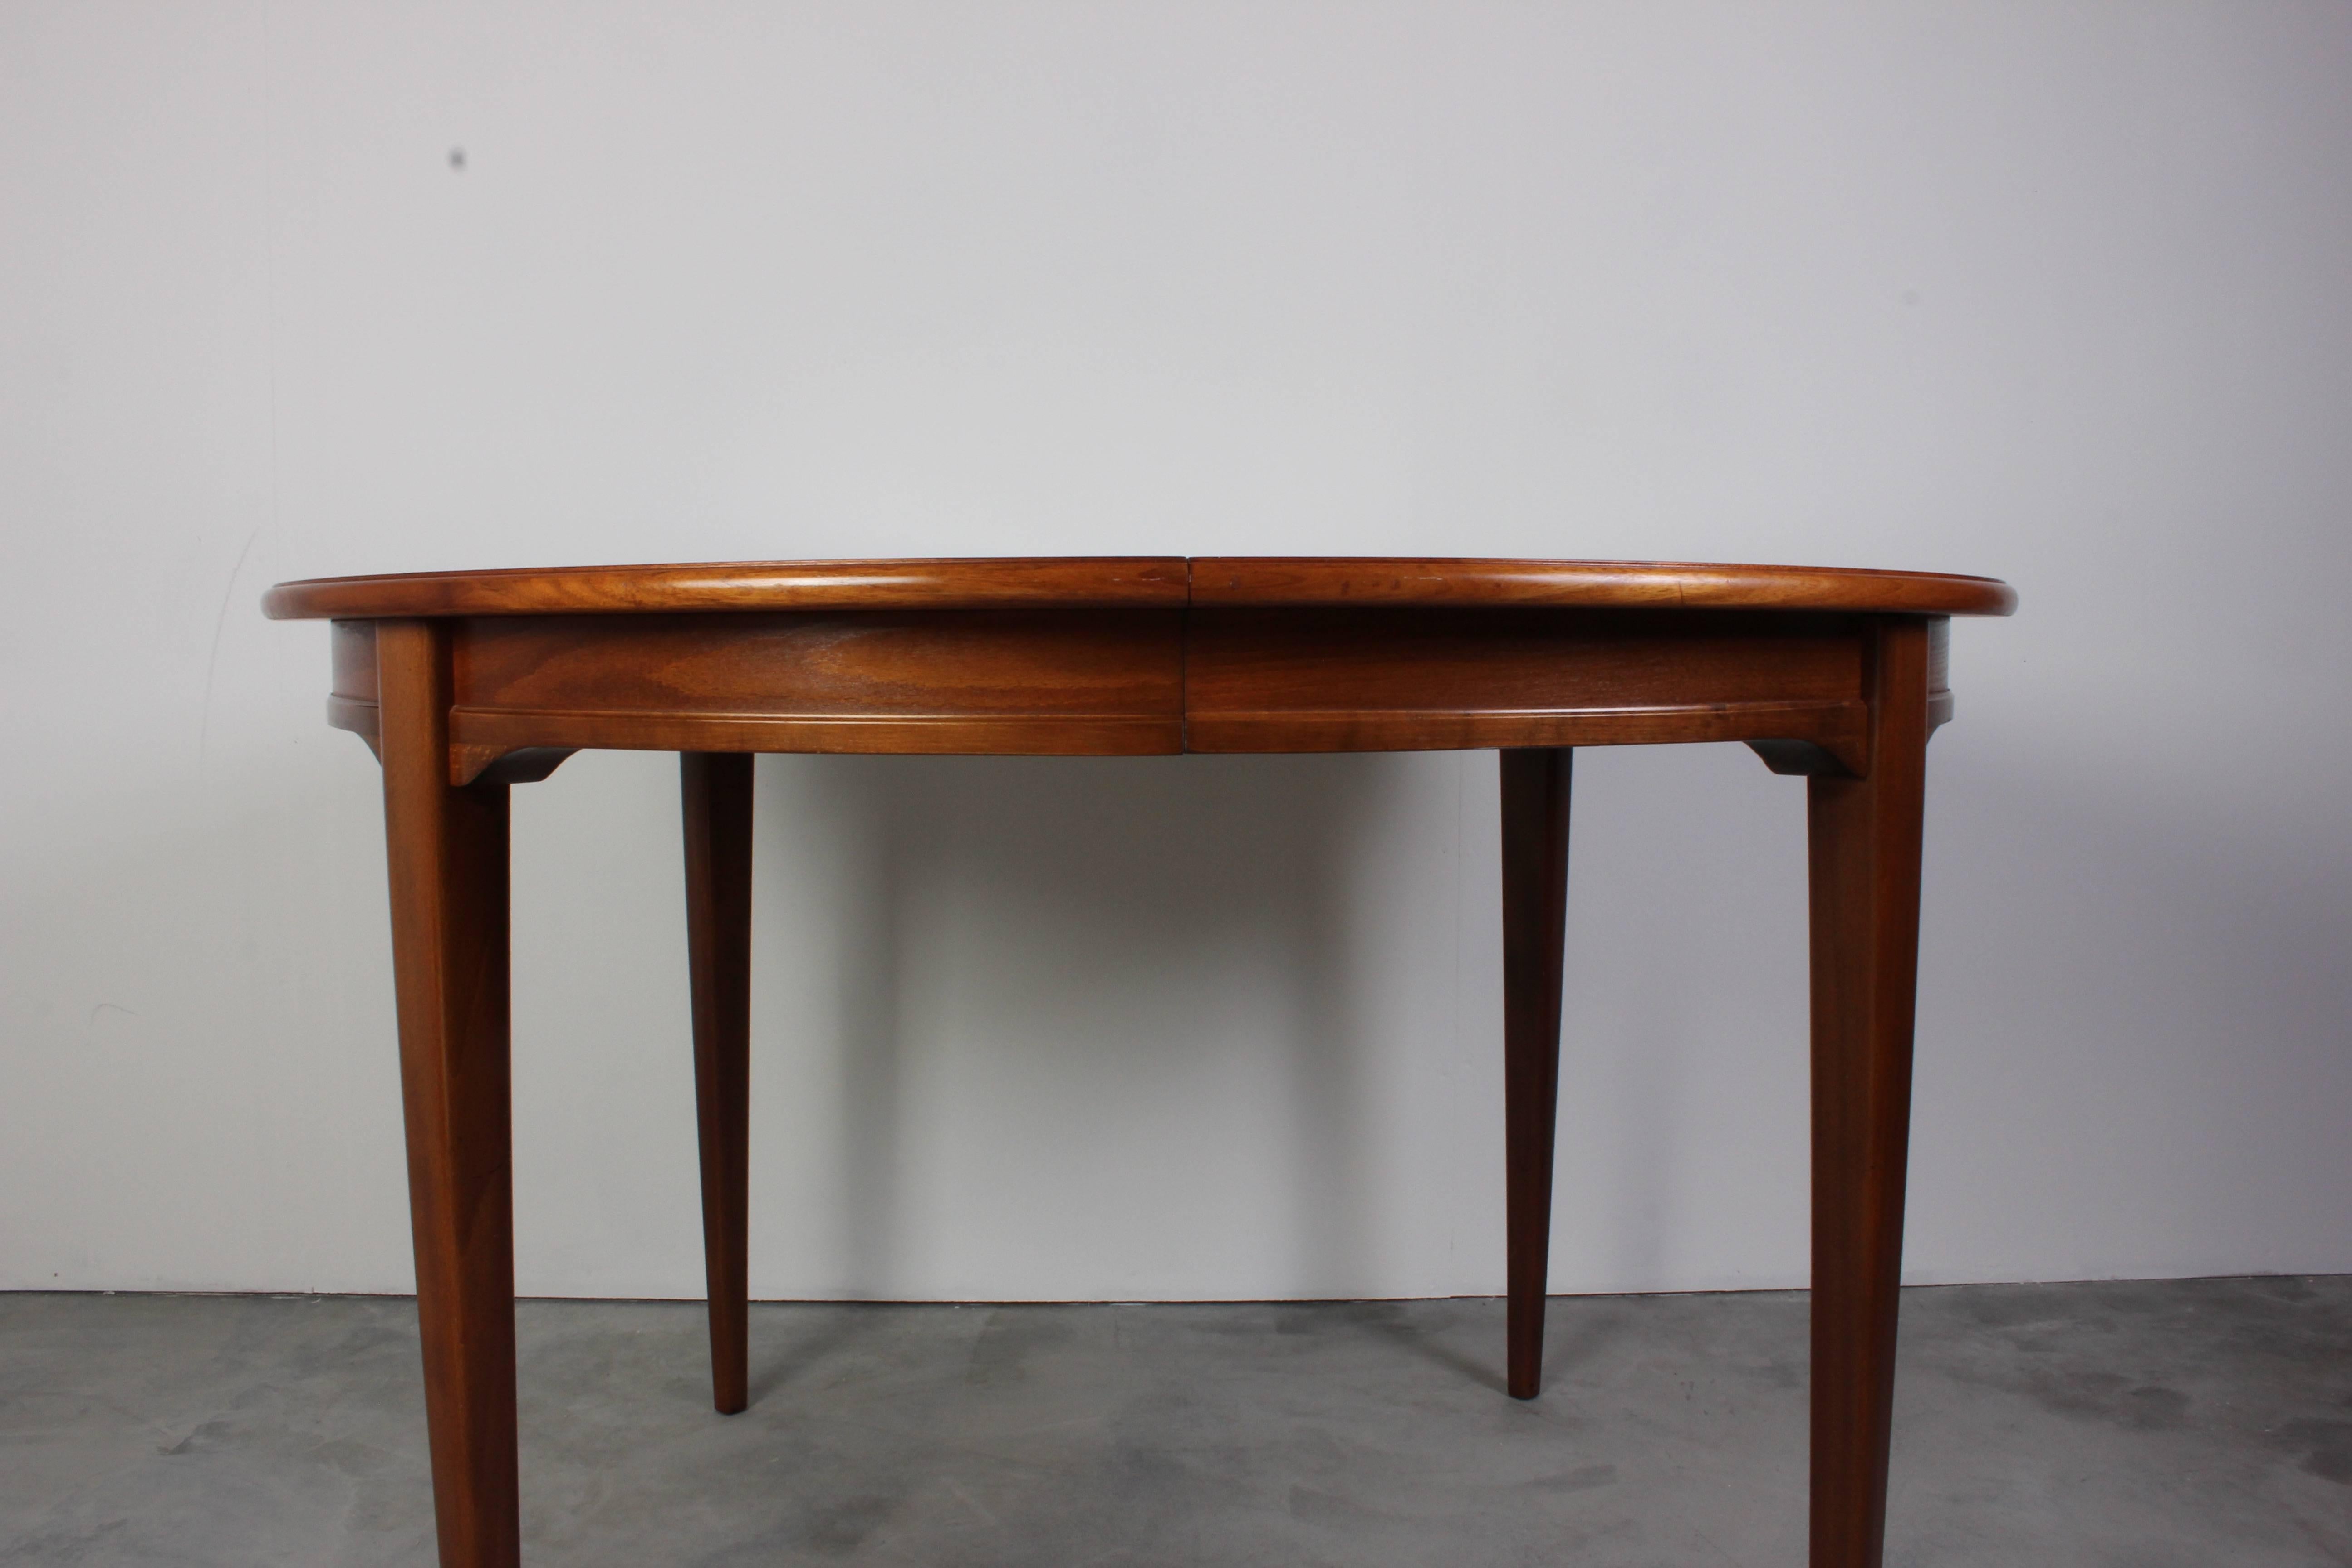 Midcentury Swedish teak dining table in very good vintage condition. This table have very nice details such as sculptured legs. There is two extra leafs that provides the possibility to make the table as long as 200cm.

This item will be available